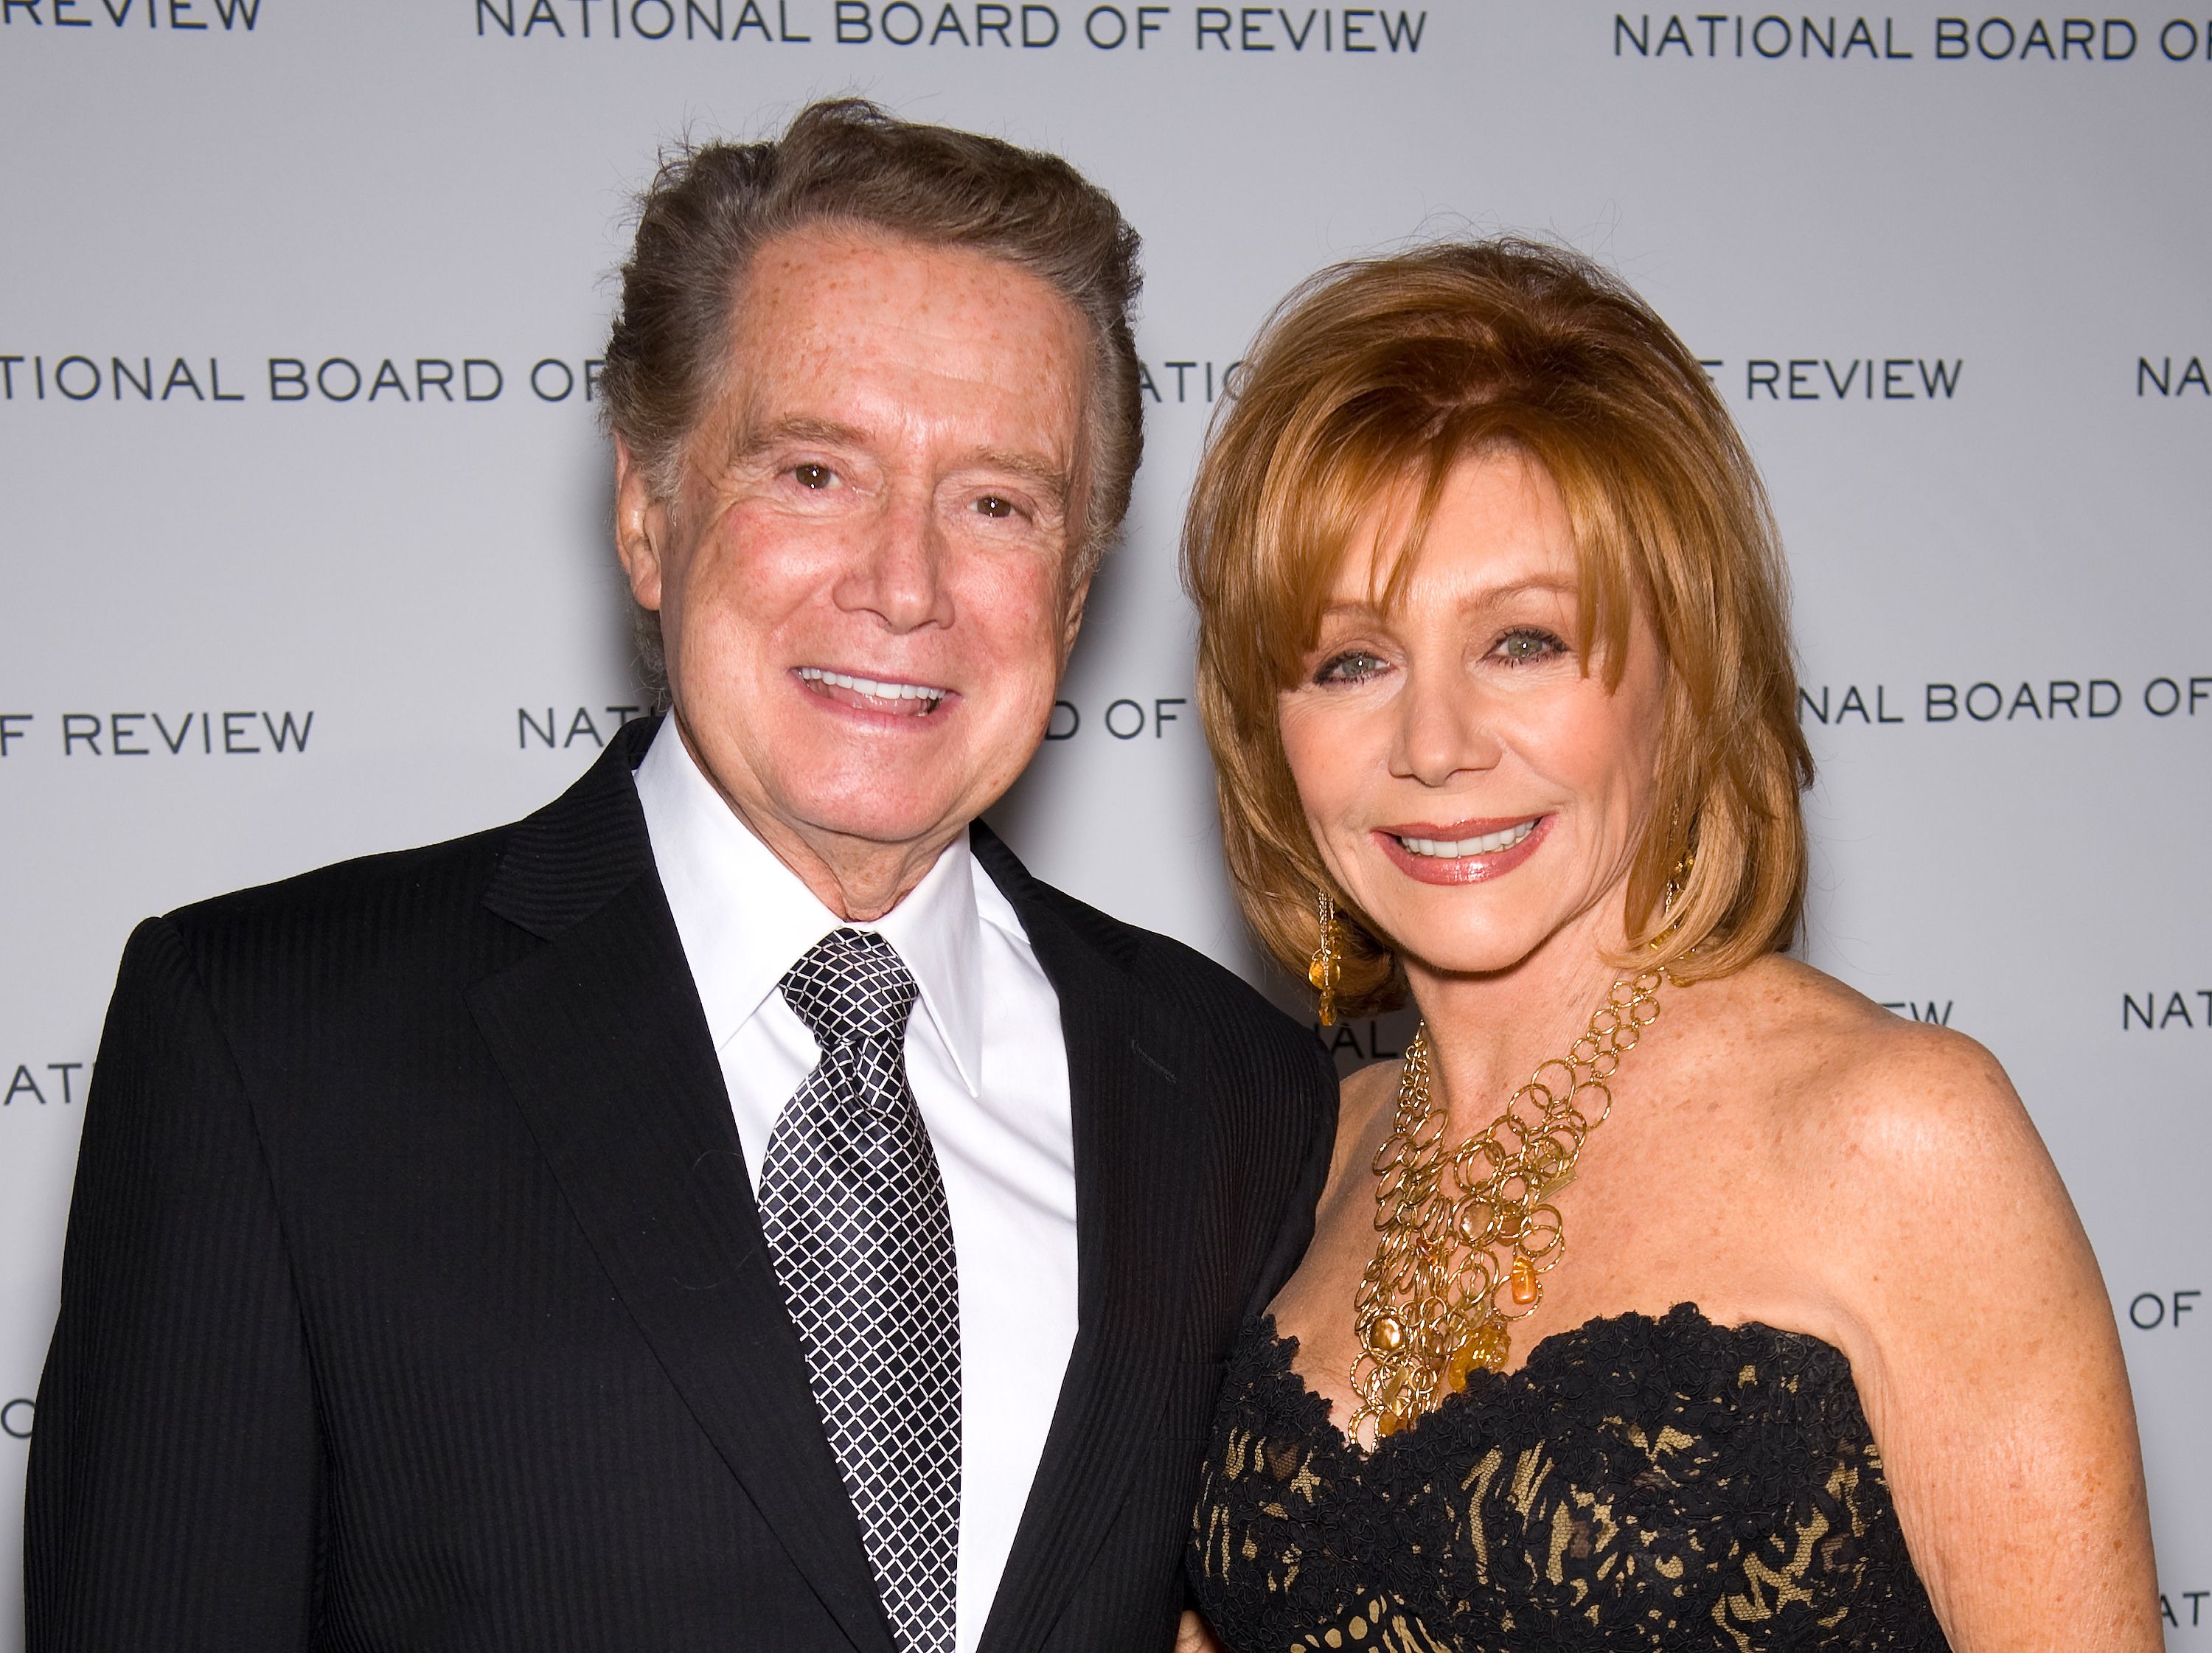 Regis and Joy Philbin at the National Board of Review Awards Gala on January 12, 2010, in New York City. | Source: Gilbert Carrasquillo/FilmMagic/Getty Images